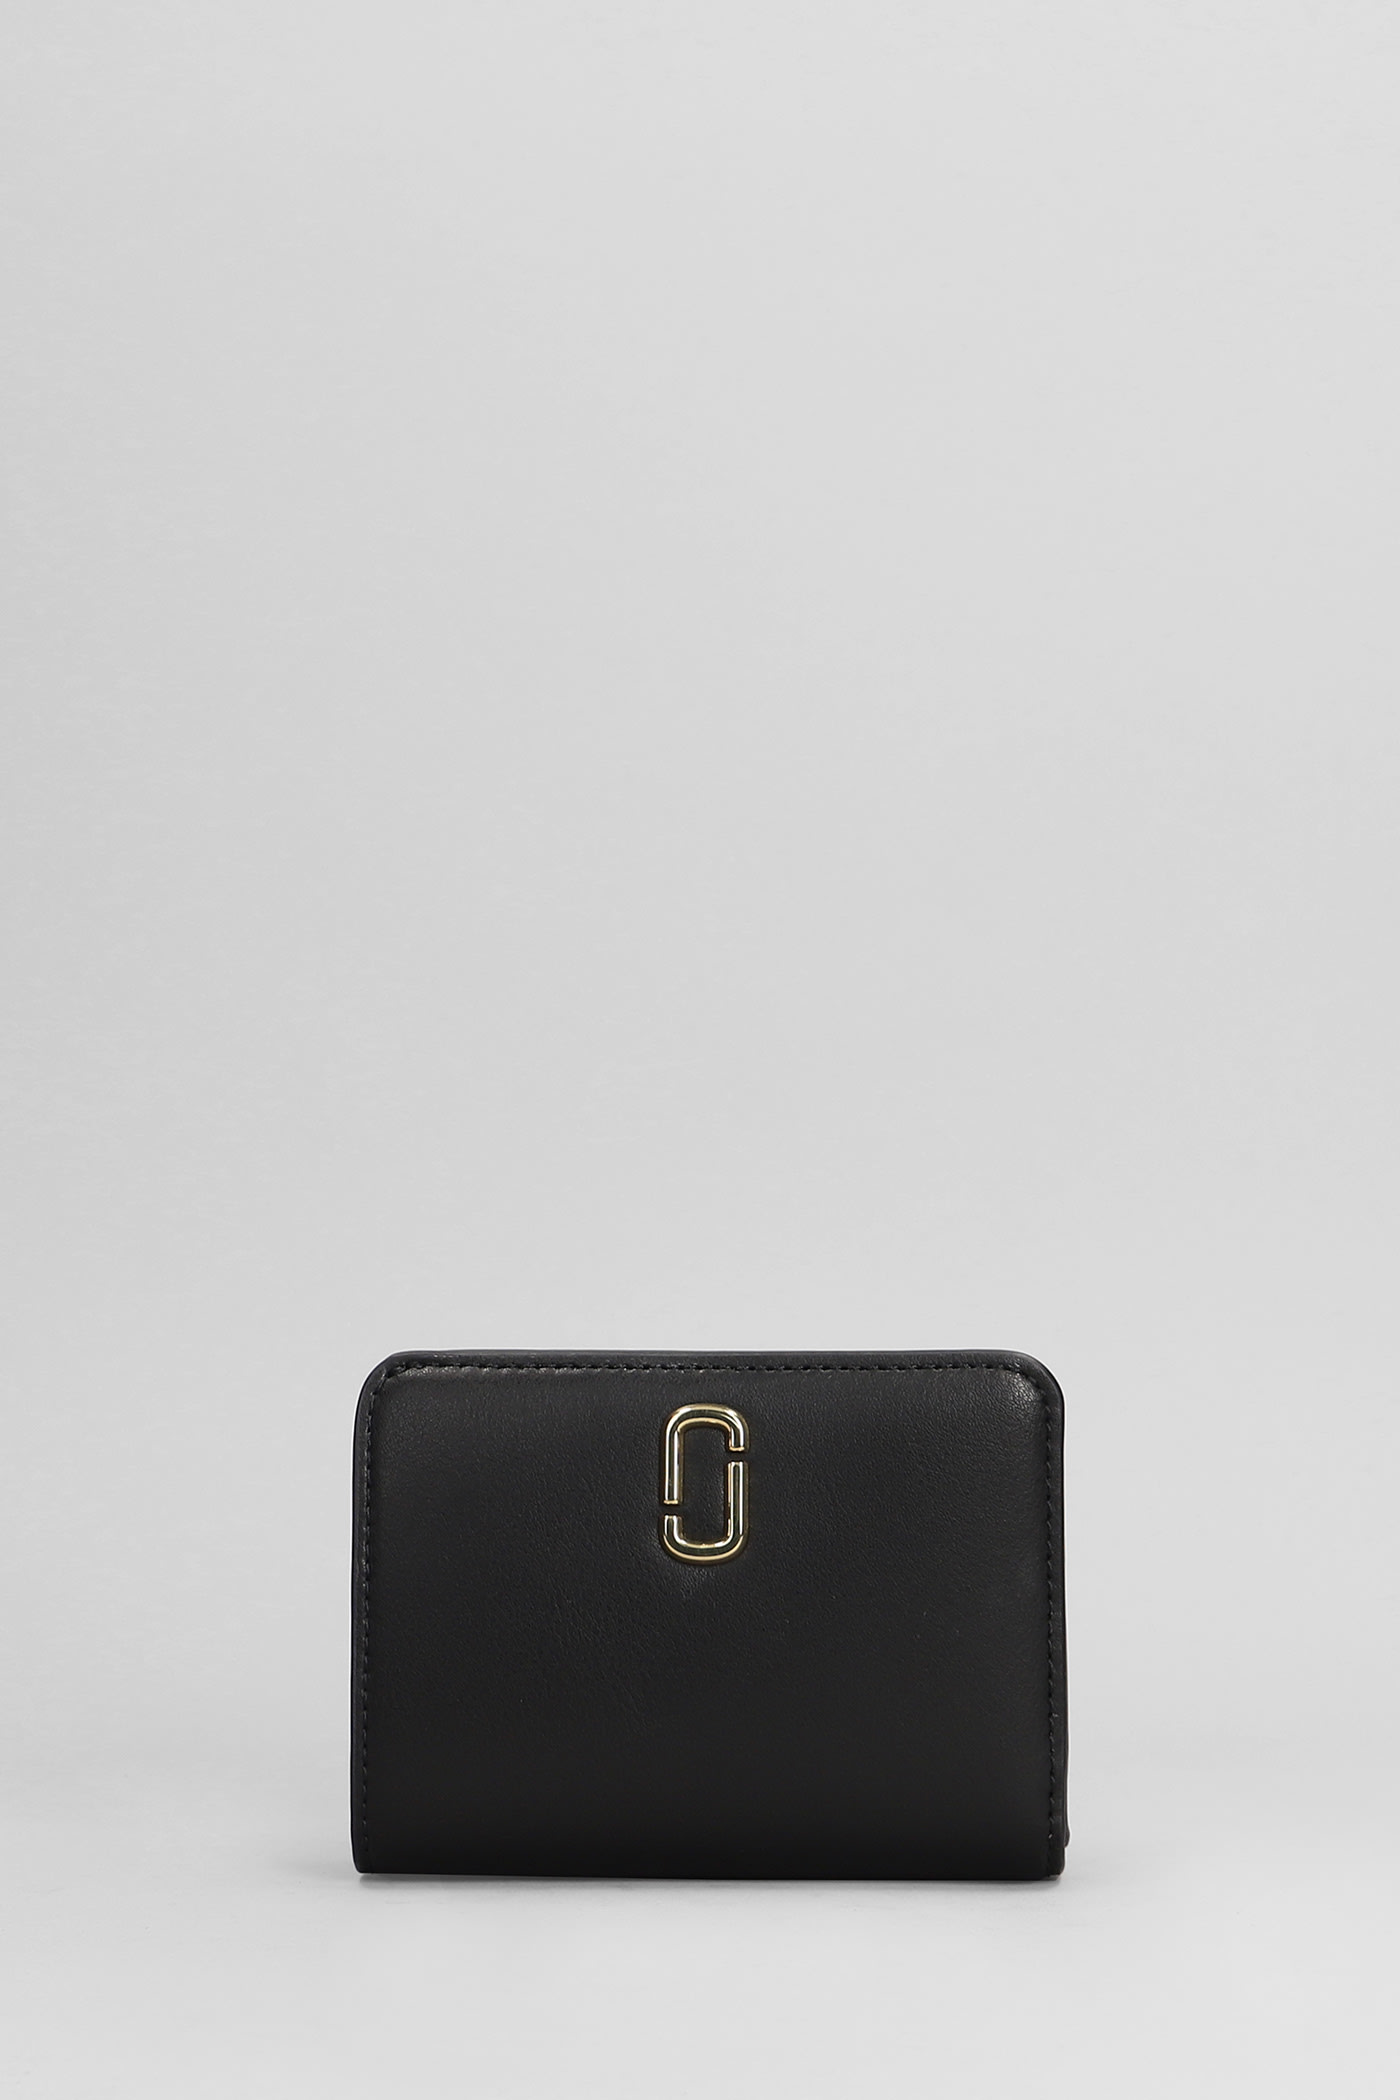 Marc Jacobs The Mini Compact Wallet In Black Leather